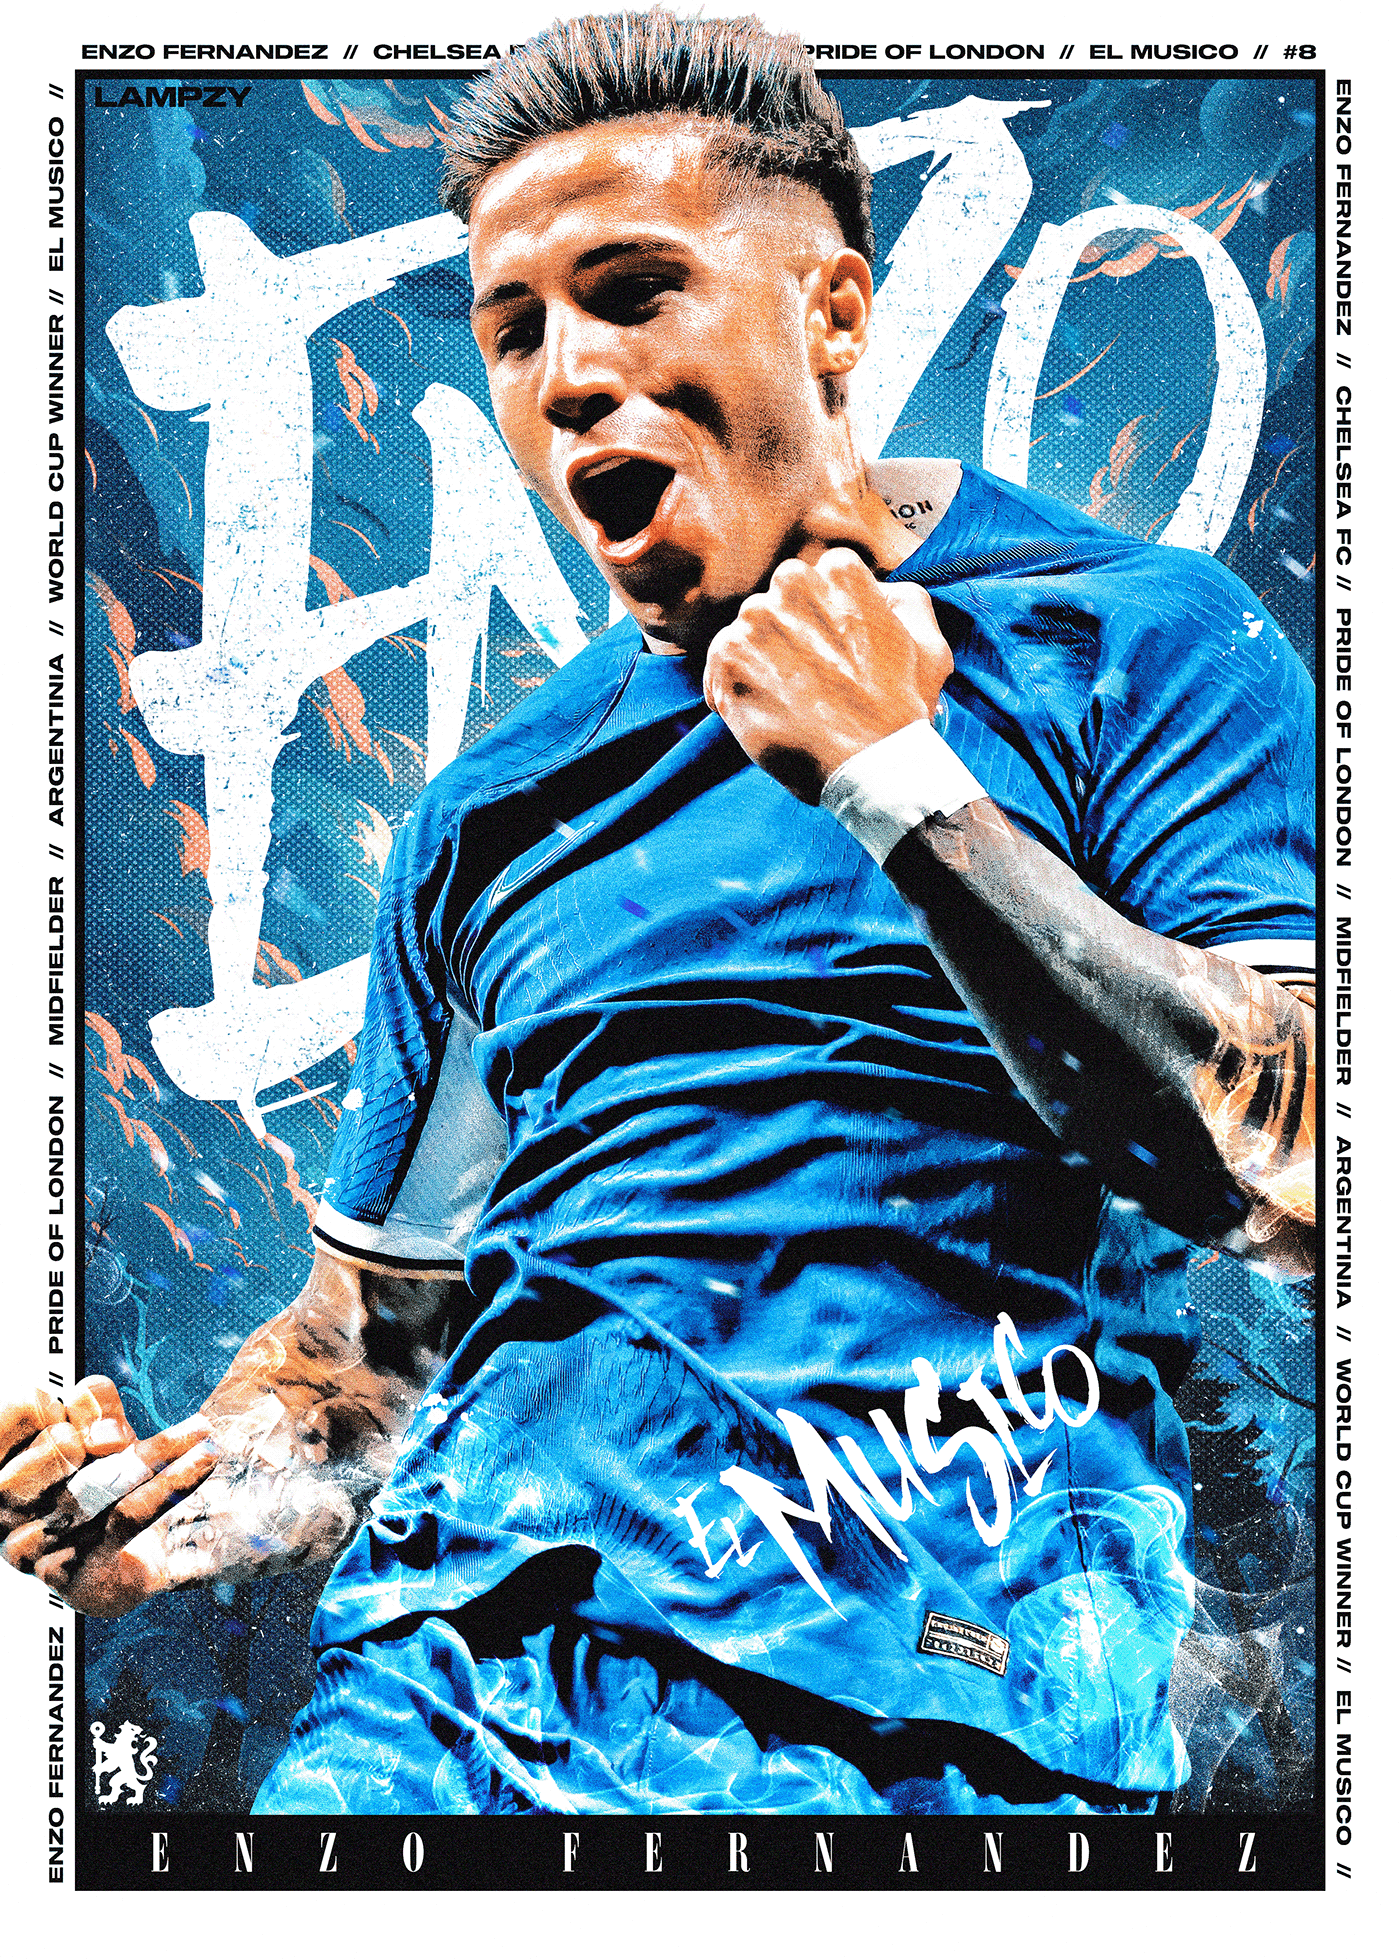 chelsea fc Premier League football soccer Sports Design poster argentina football cards sports cards soccer cards